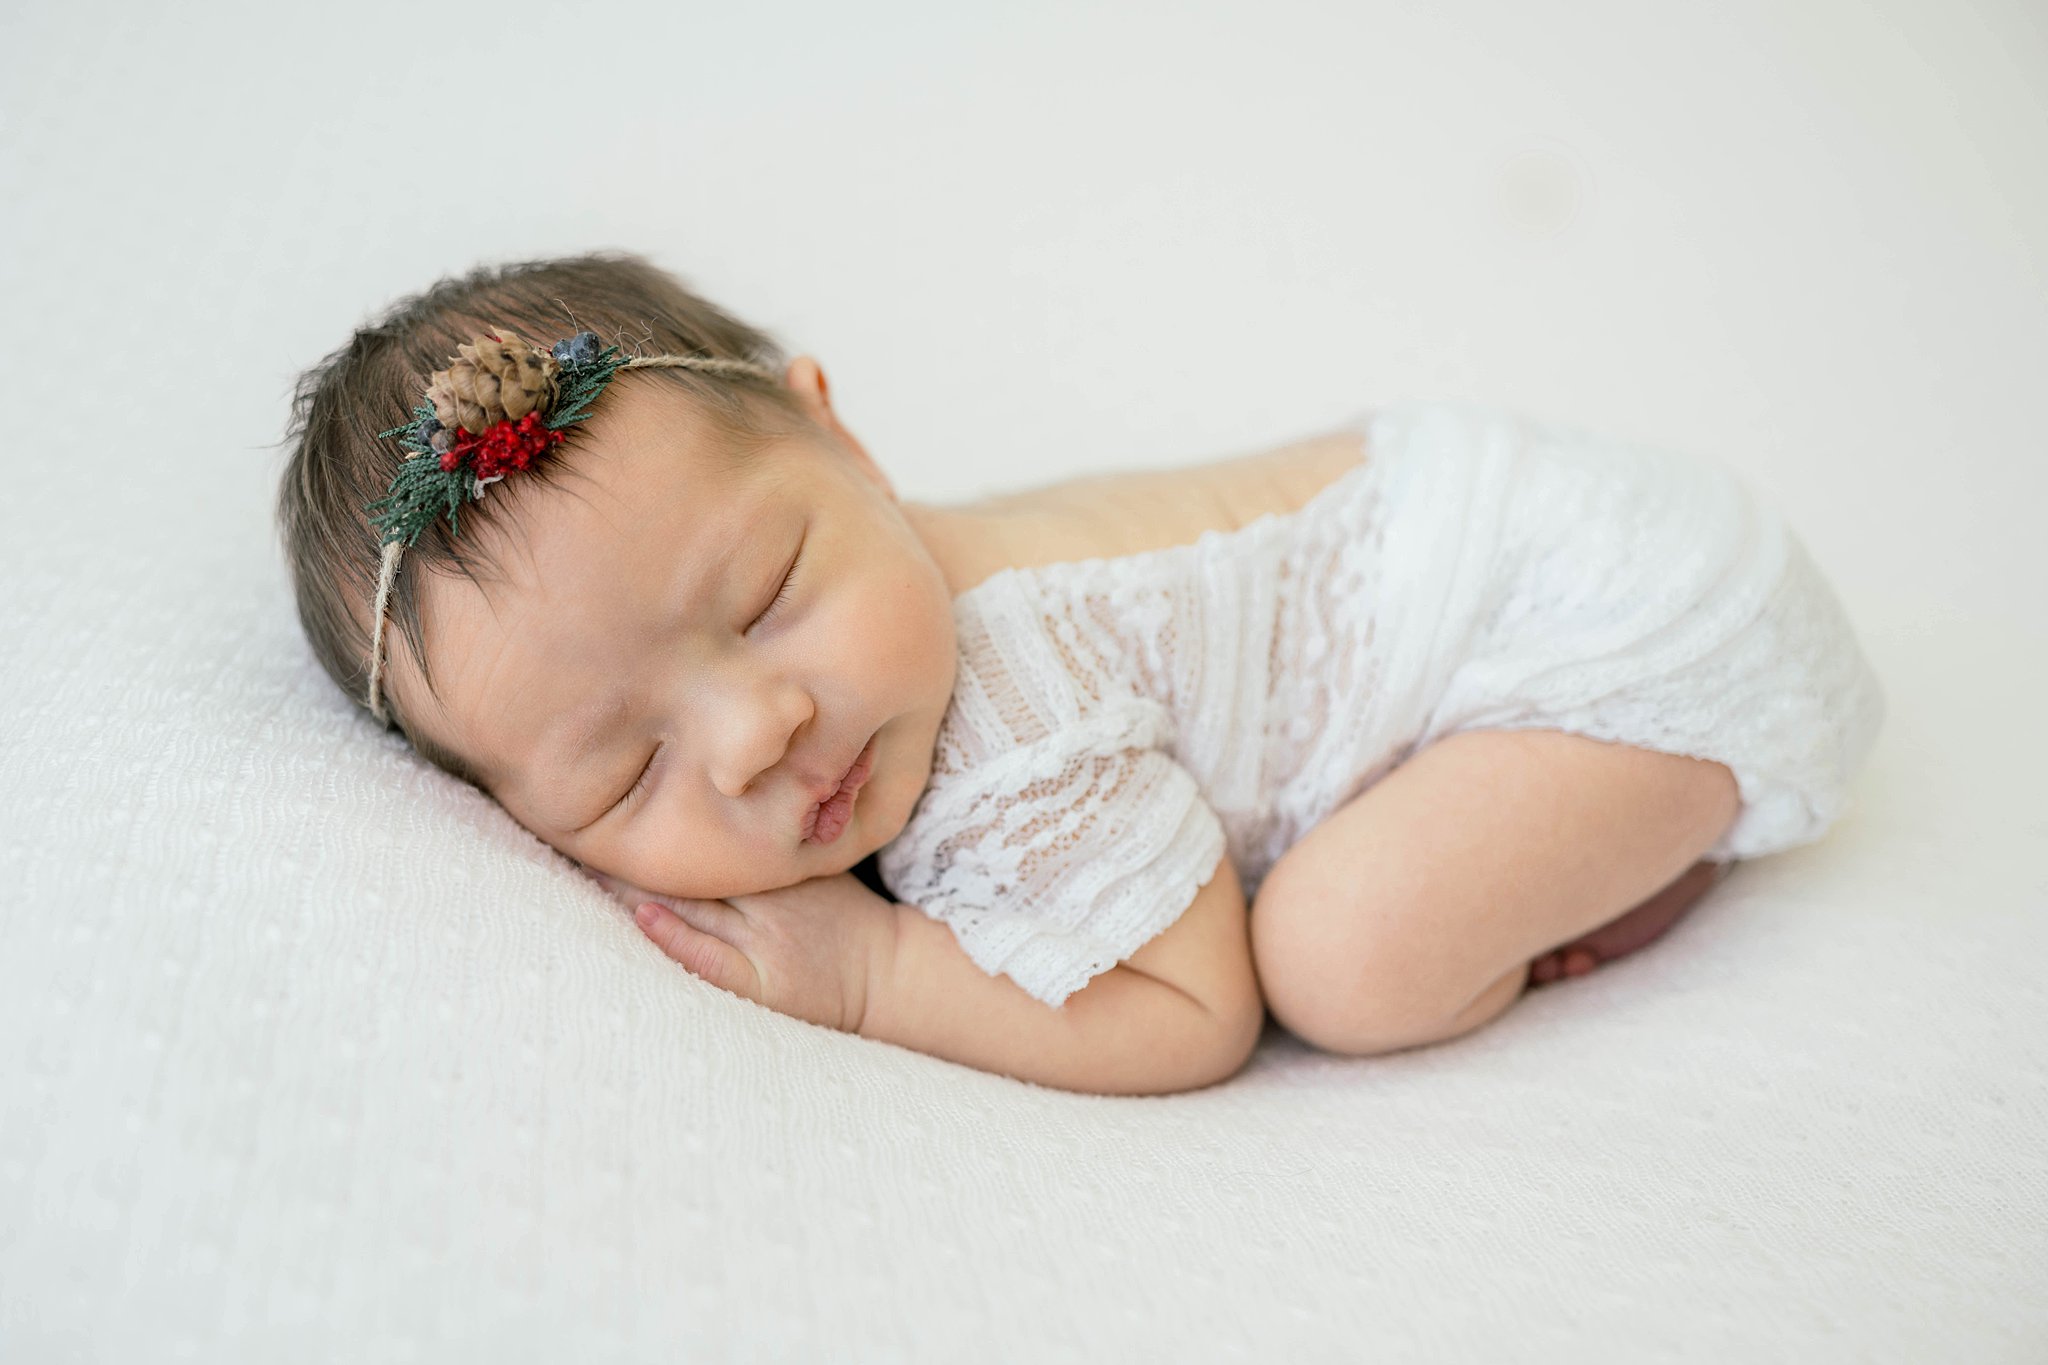 A newborn baby sleeps in a lace onesie while wearing a christmas wreath headband ultrasound oklahoma city